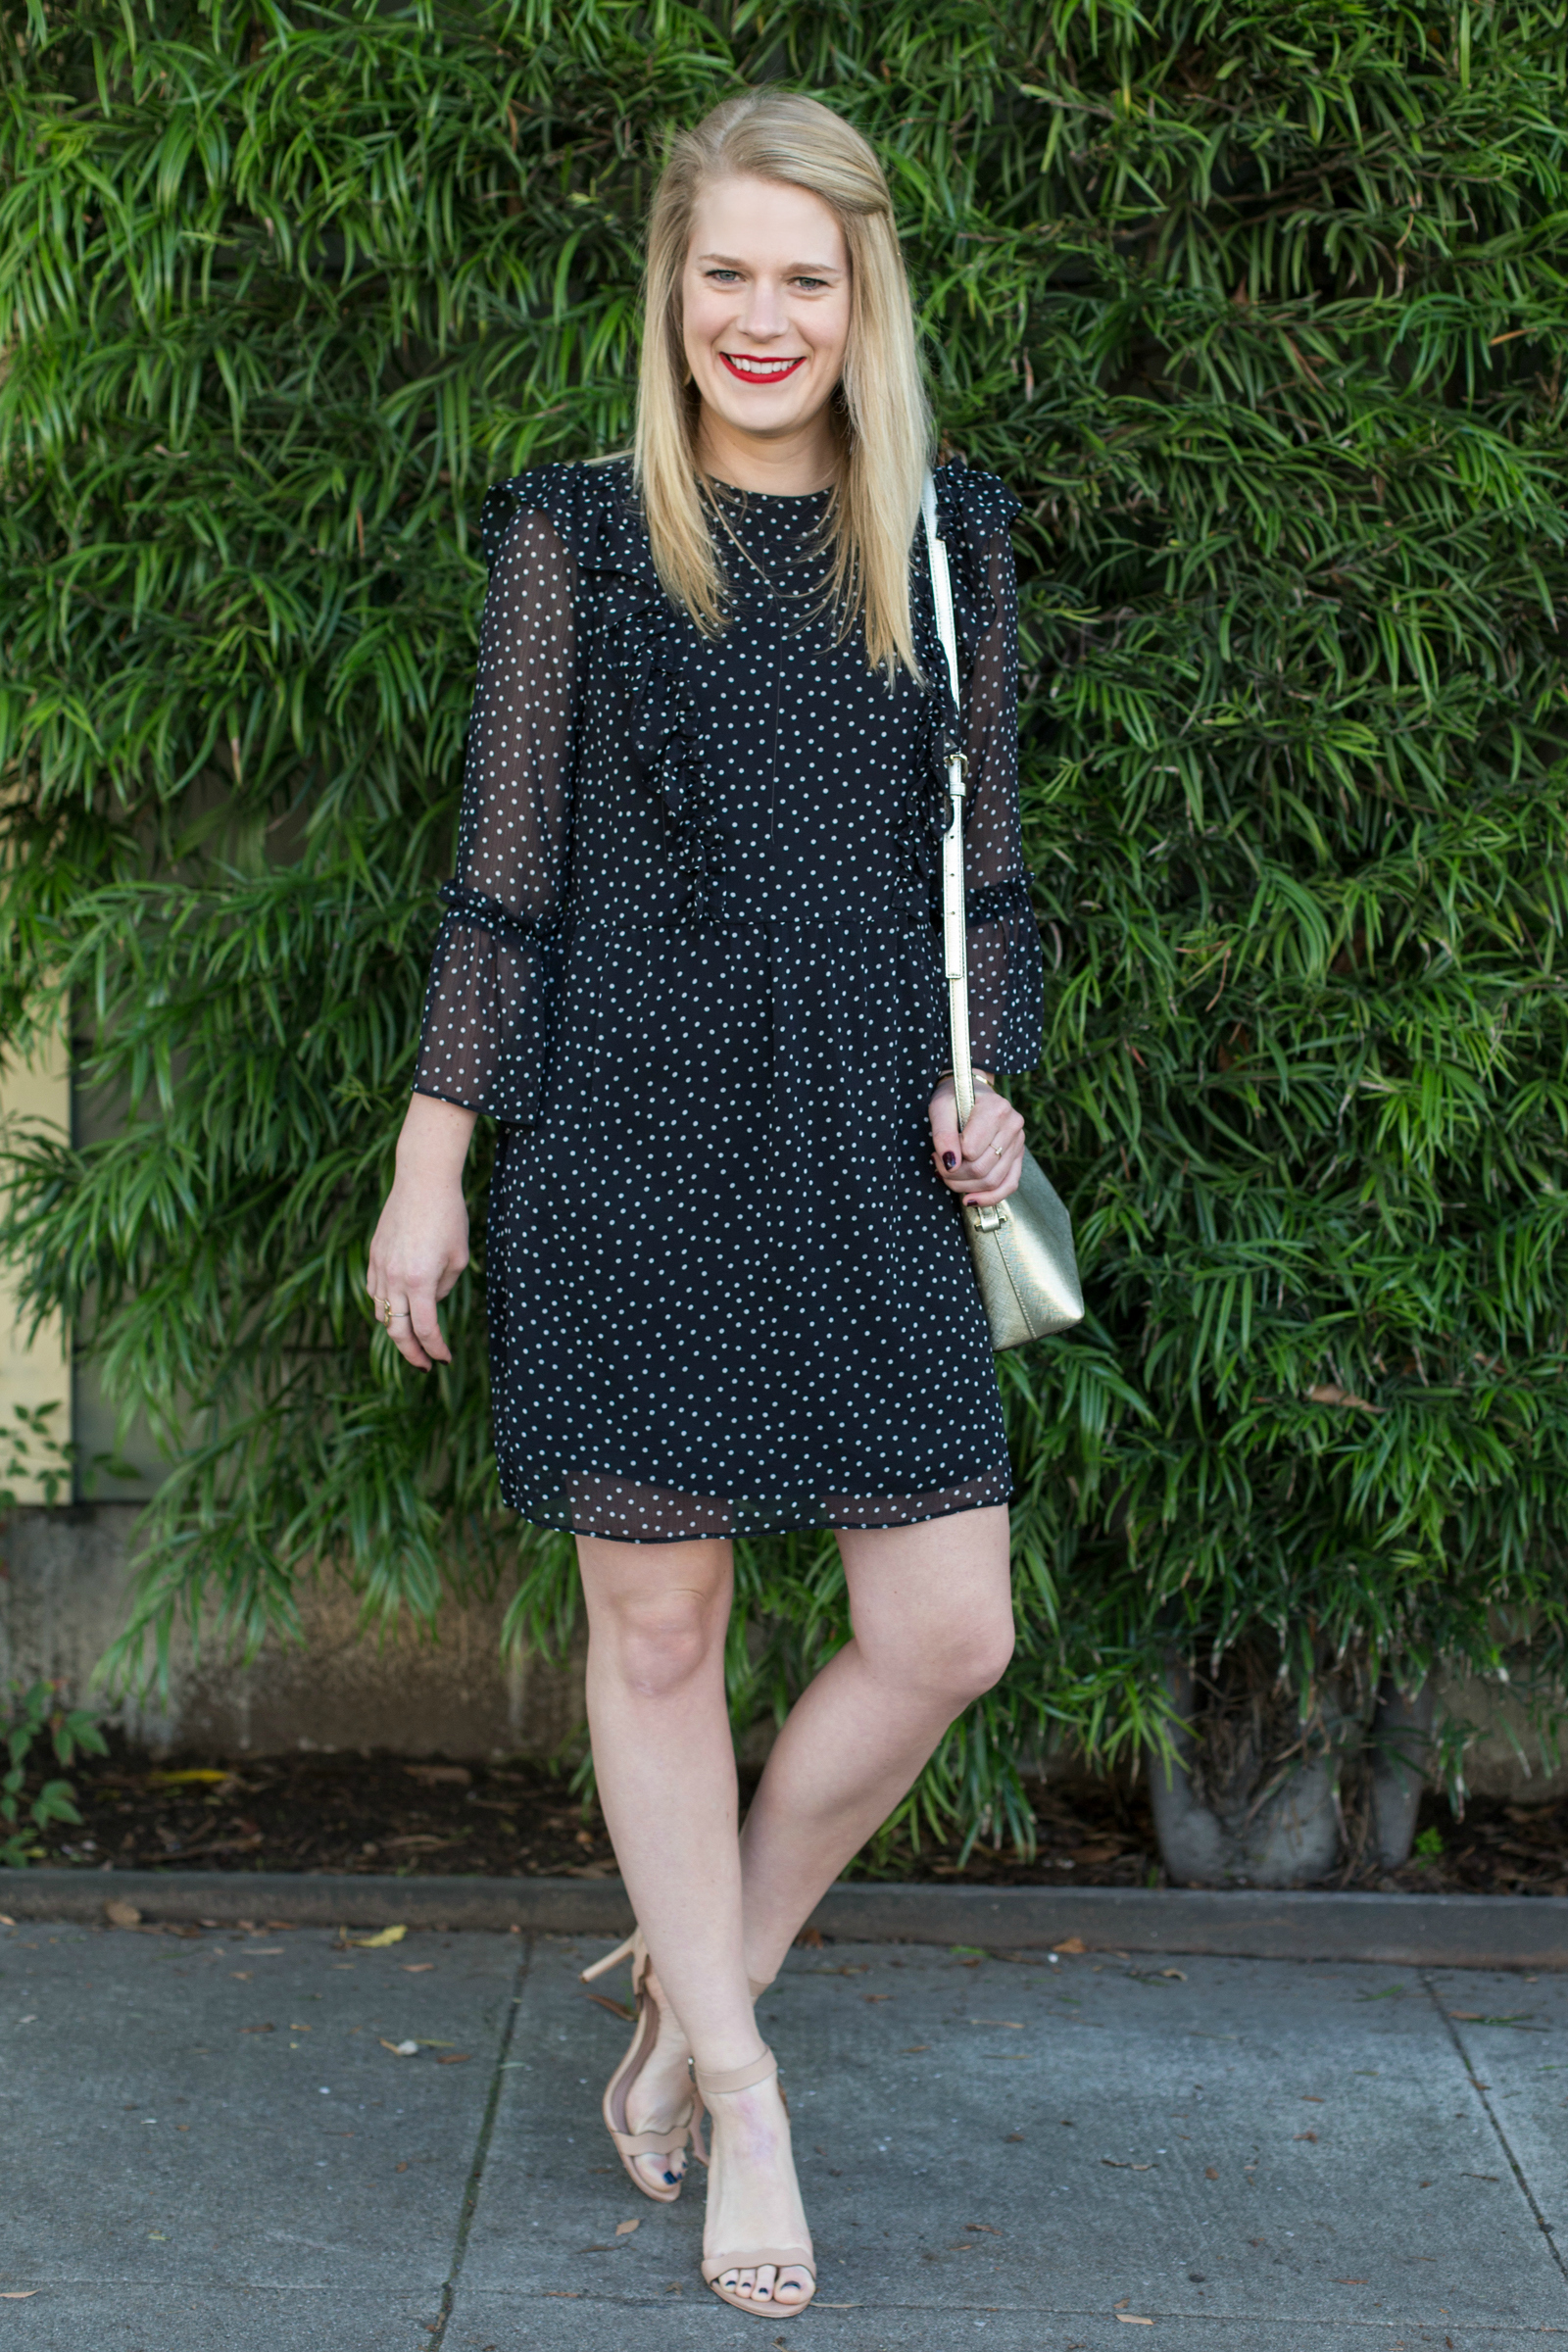 Ruffled and Dotted Dress from Topshop.